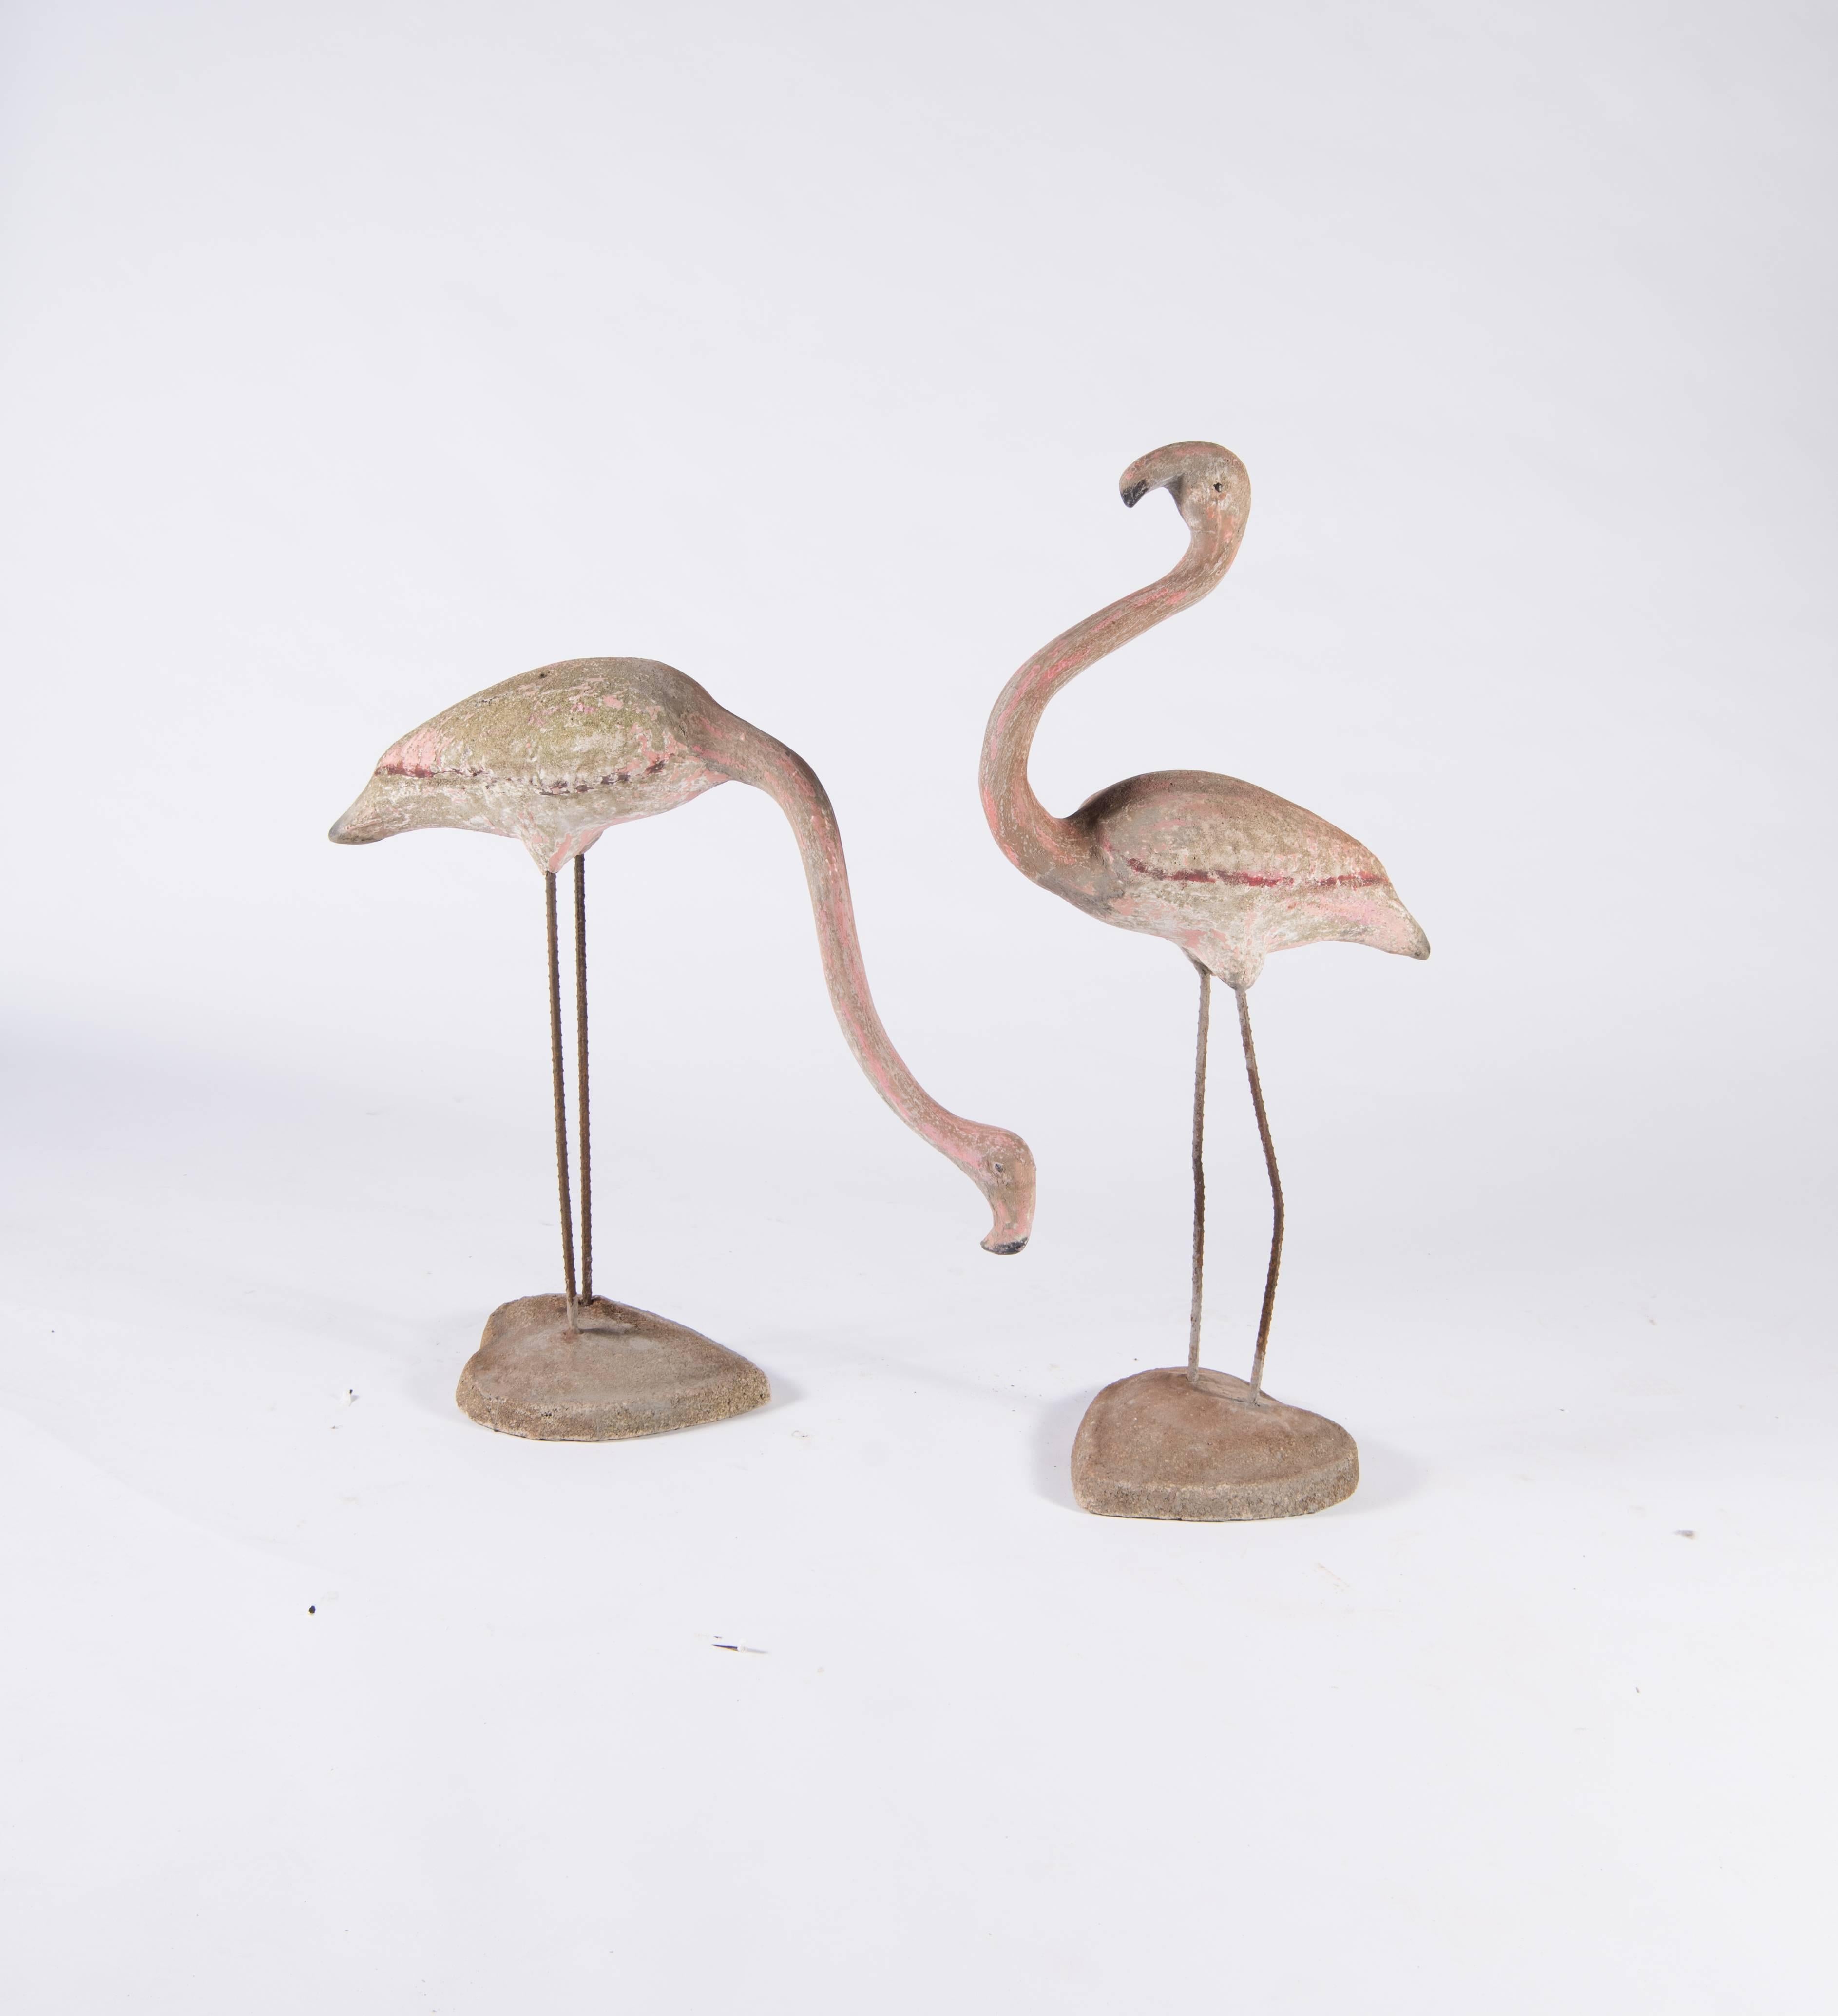 A very special pair of concrete flamingos. Heavy and sturdy, the concrete birds Stand solidly on legs made of rebar sunk into a hefty concrete base and retain traces of the original paint which has been worn and dulled by age into a soft pink